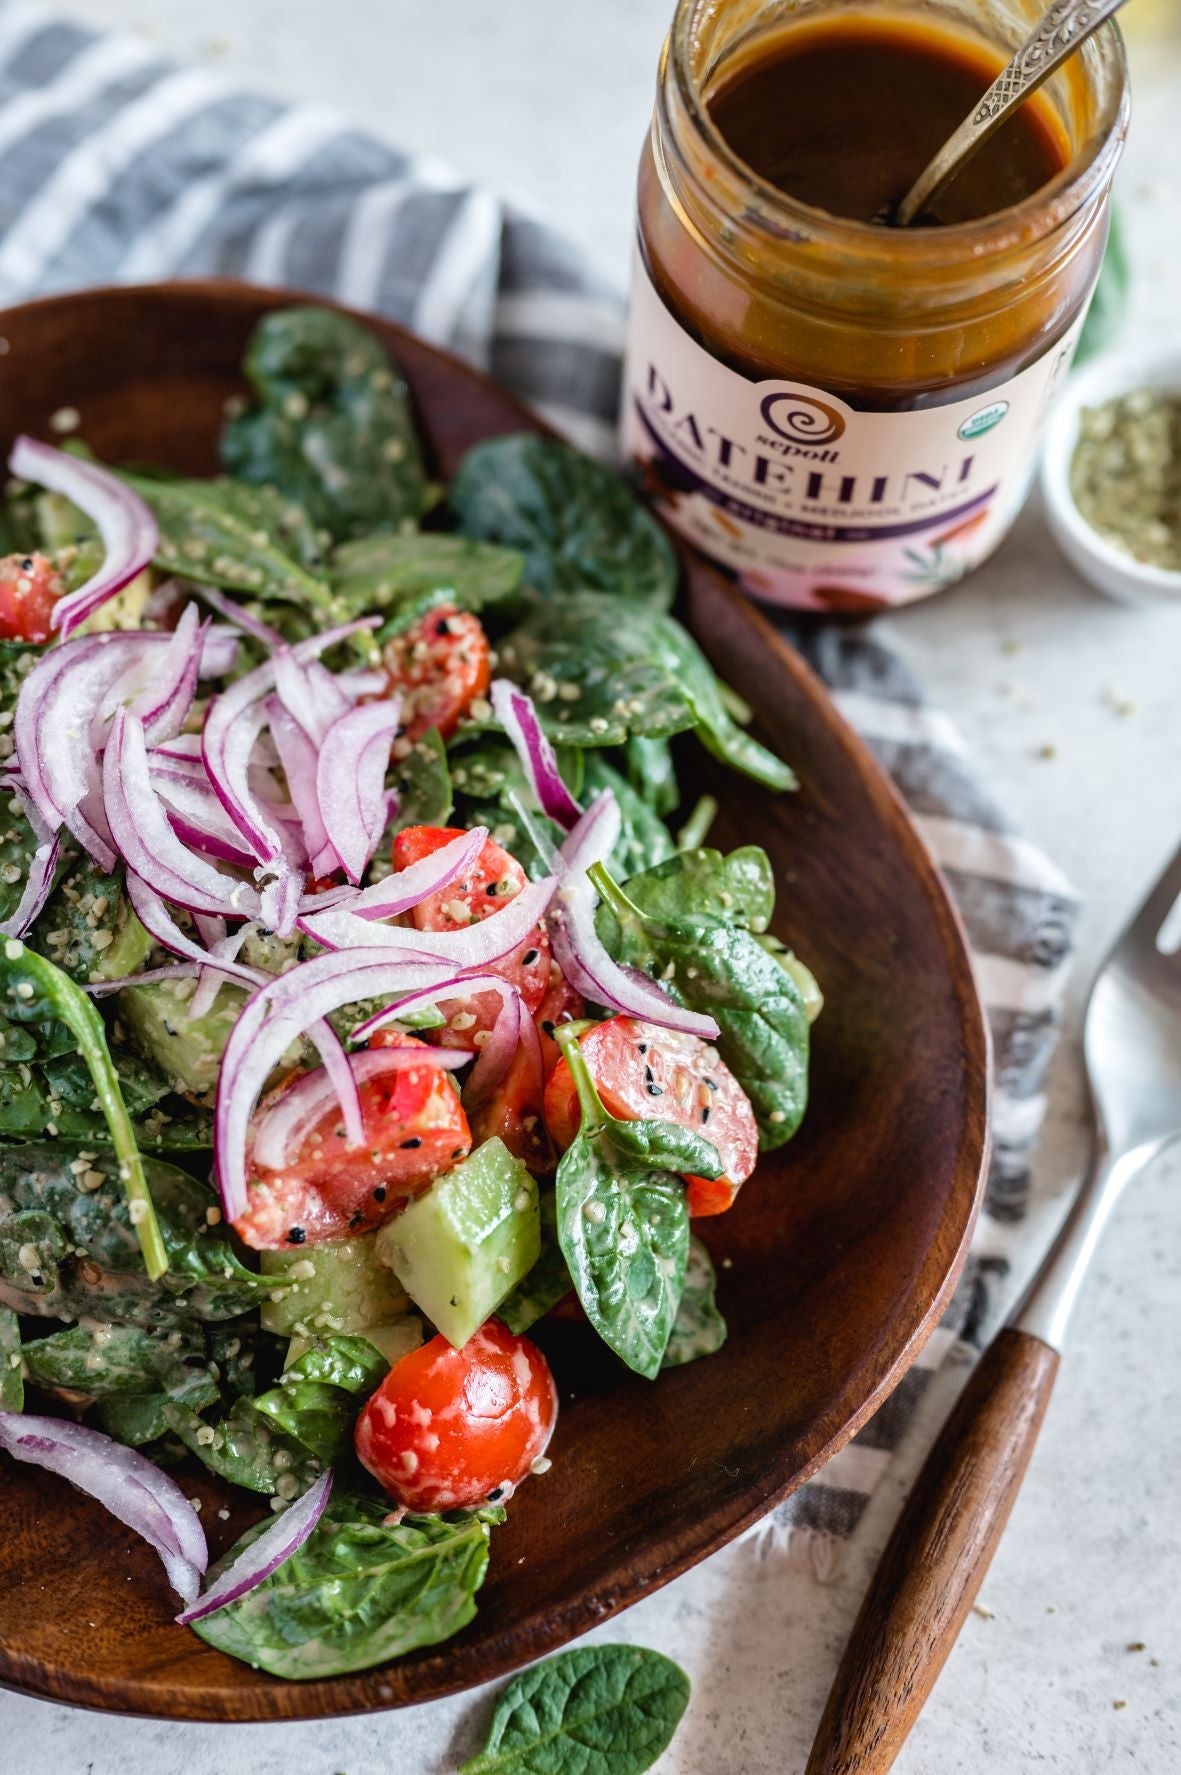 Spinach salad with Datehini 